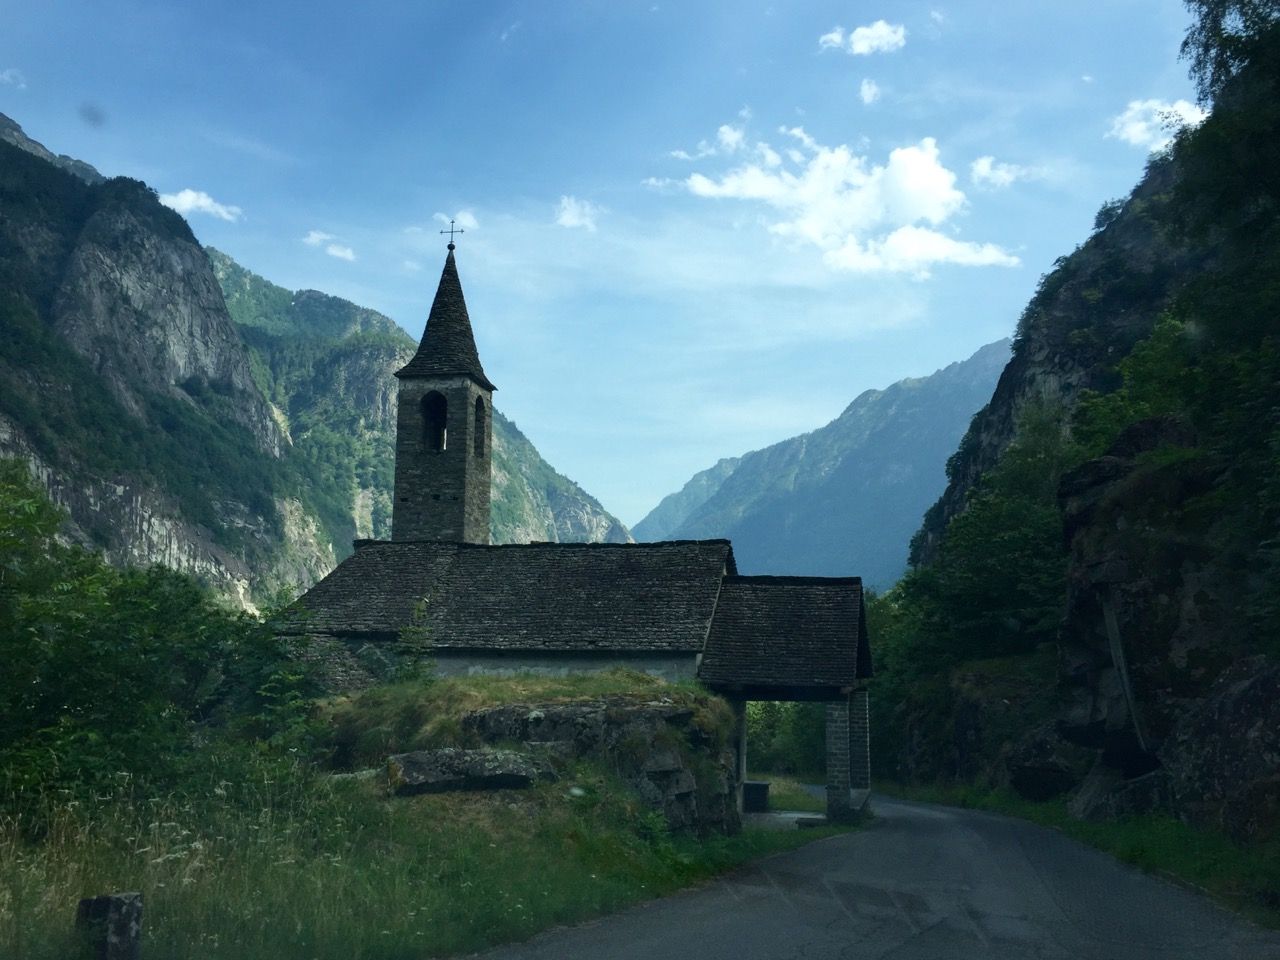 An old church on a winding mountain road.